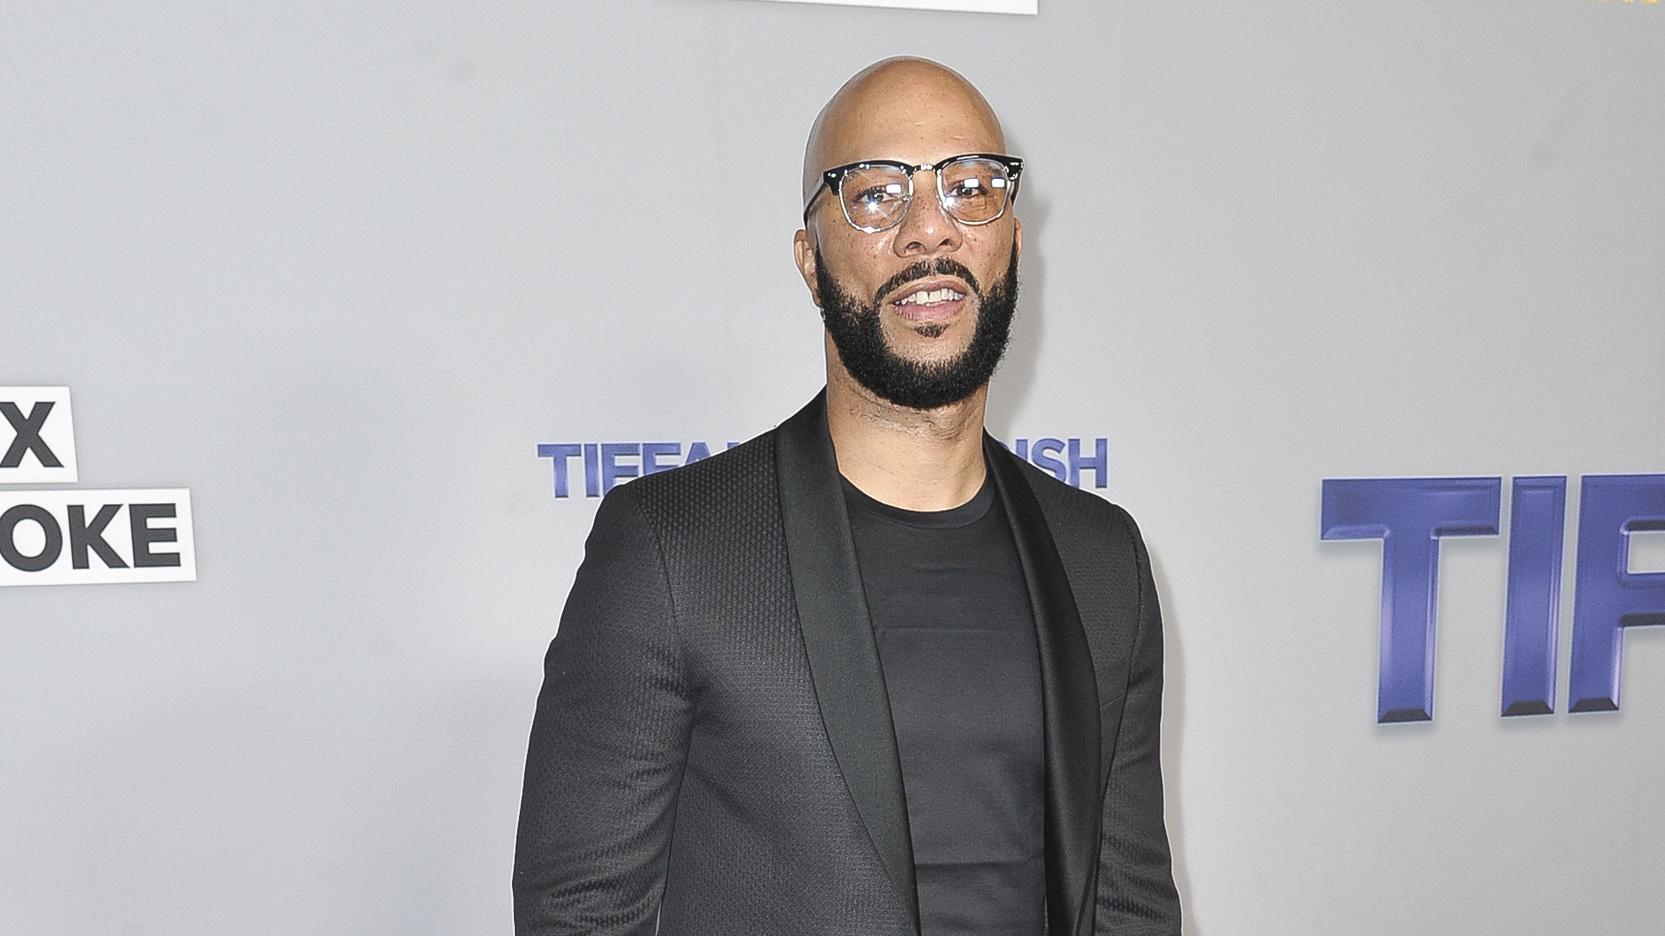 Common attends Tiffany Haddish’s “Black Mitzvah” at the SLS Hotel on Tuesday, Dec. 3, 2019, in Los Angeles. (Photo by Richard Shotwell / Invision / AP)